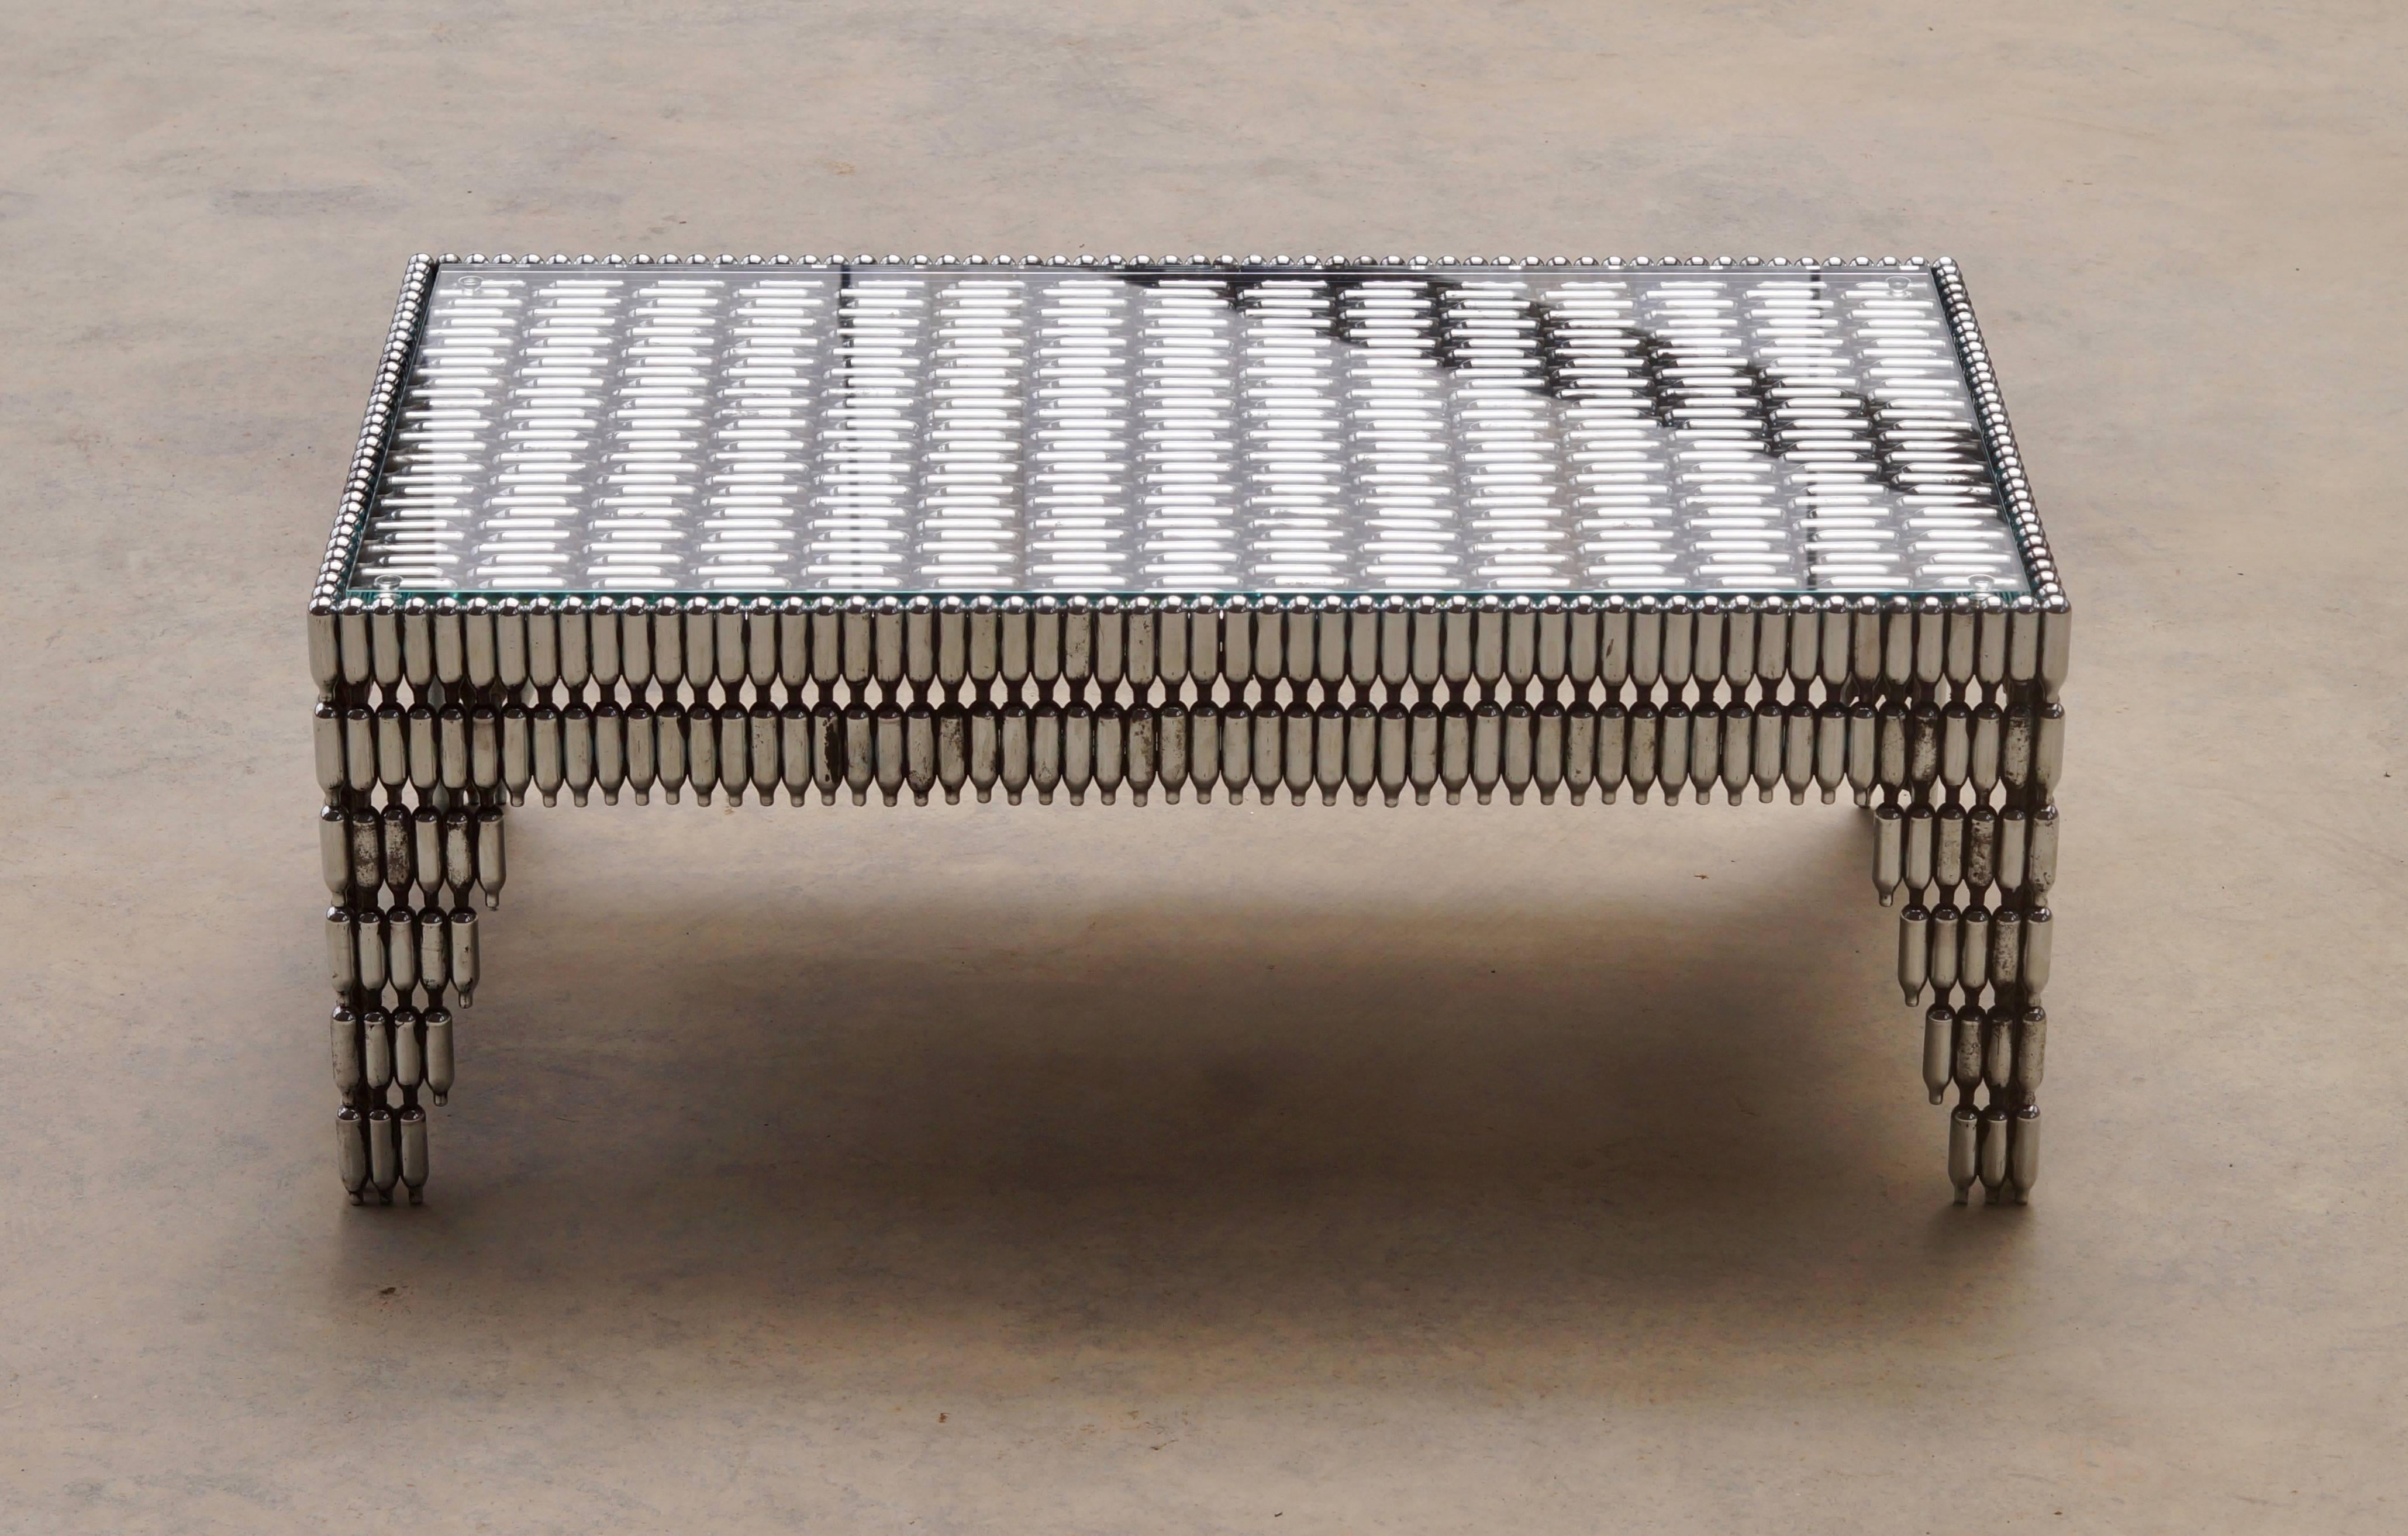 This unique sculptural coffee table is made from used NOS or laughing gas canisters which were commonly found littering the ground after music festivals and parties. These canisters were originally intended for making whipped cream in restaurants